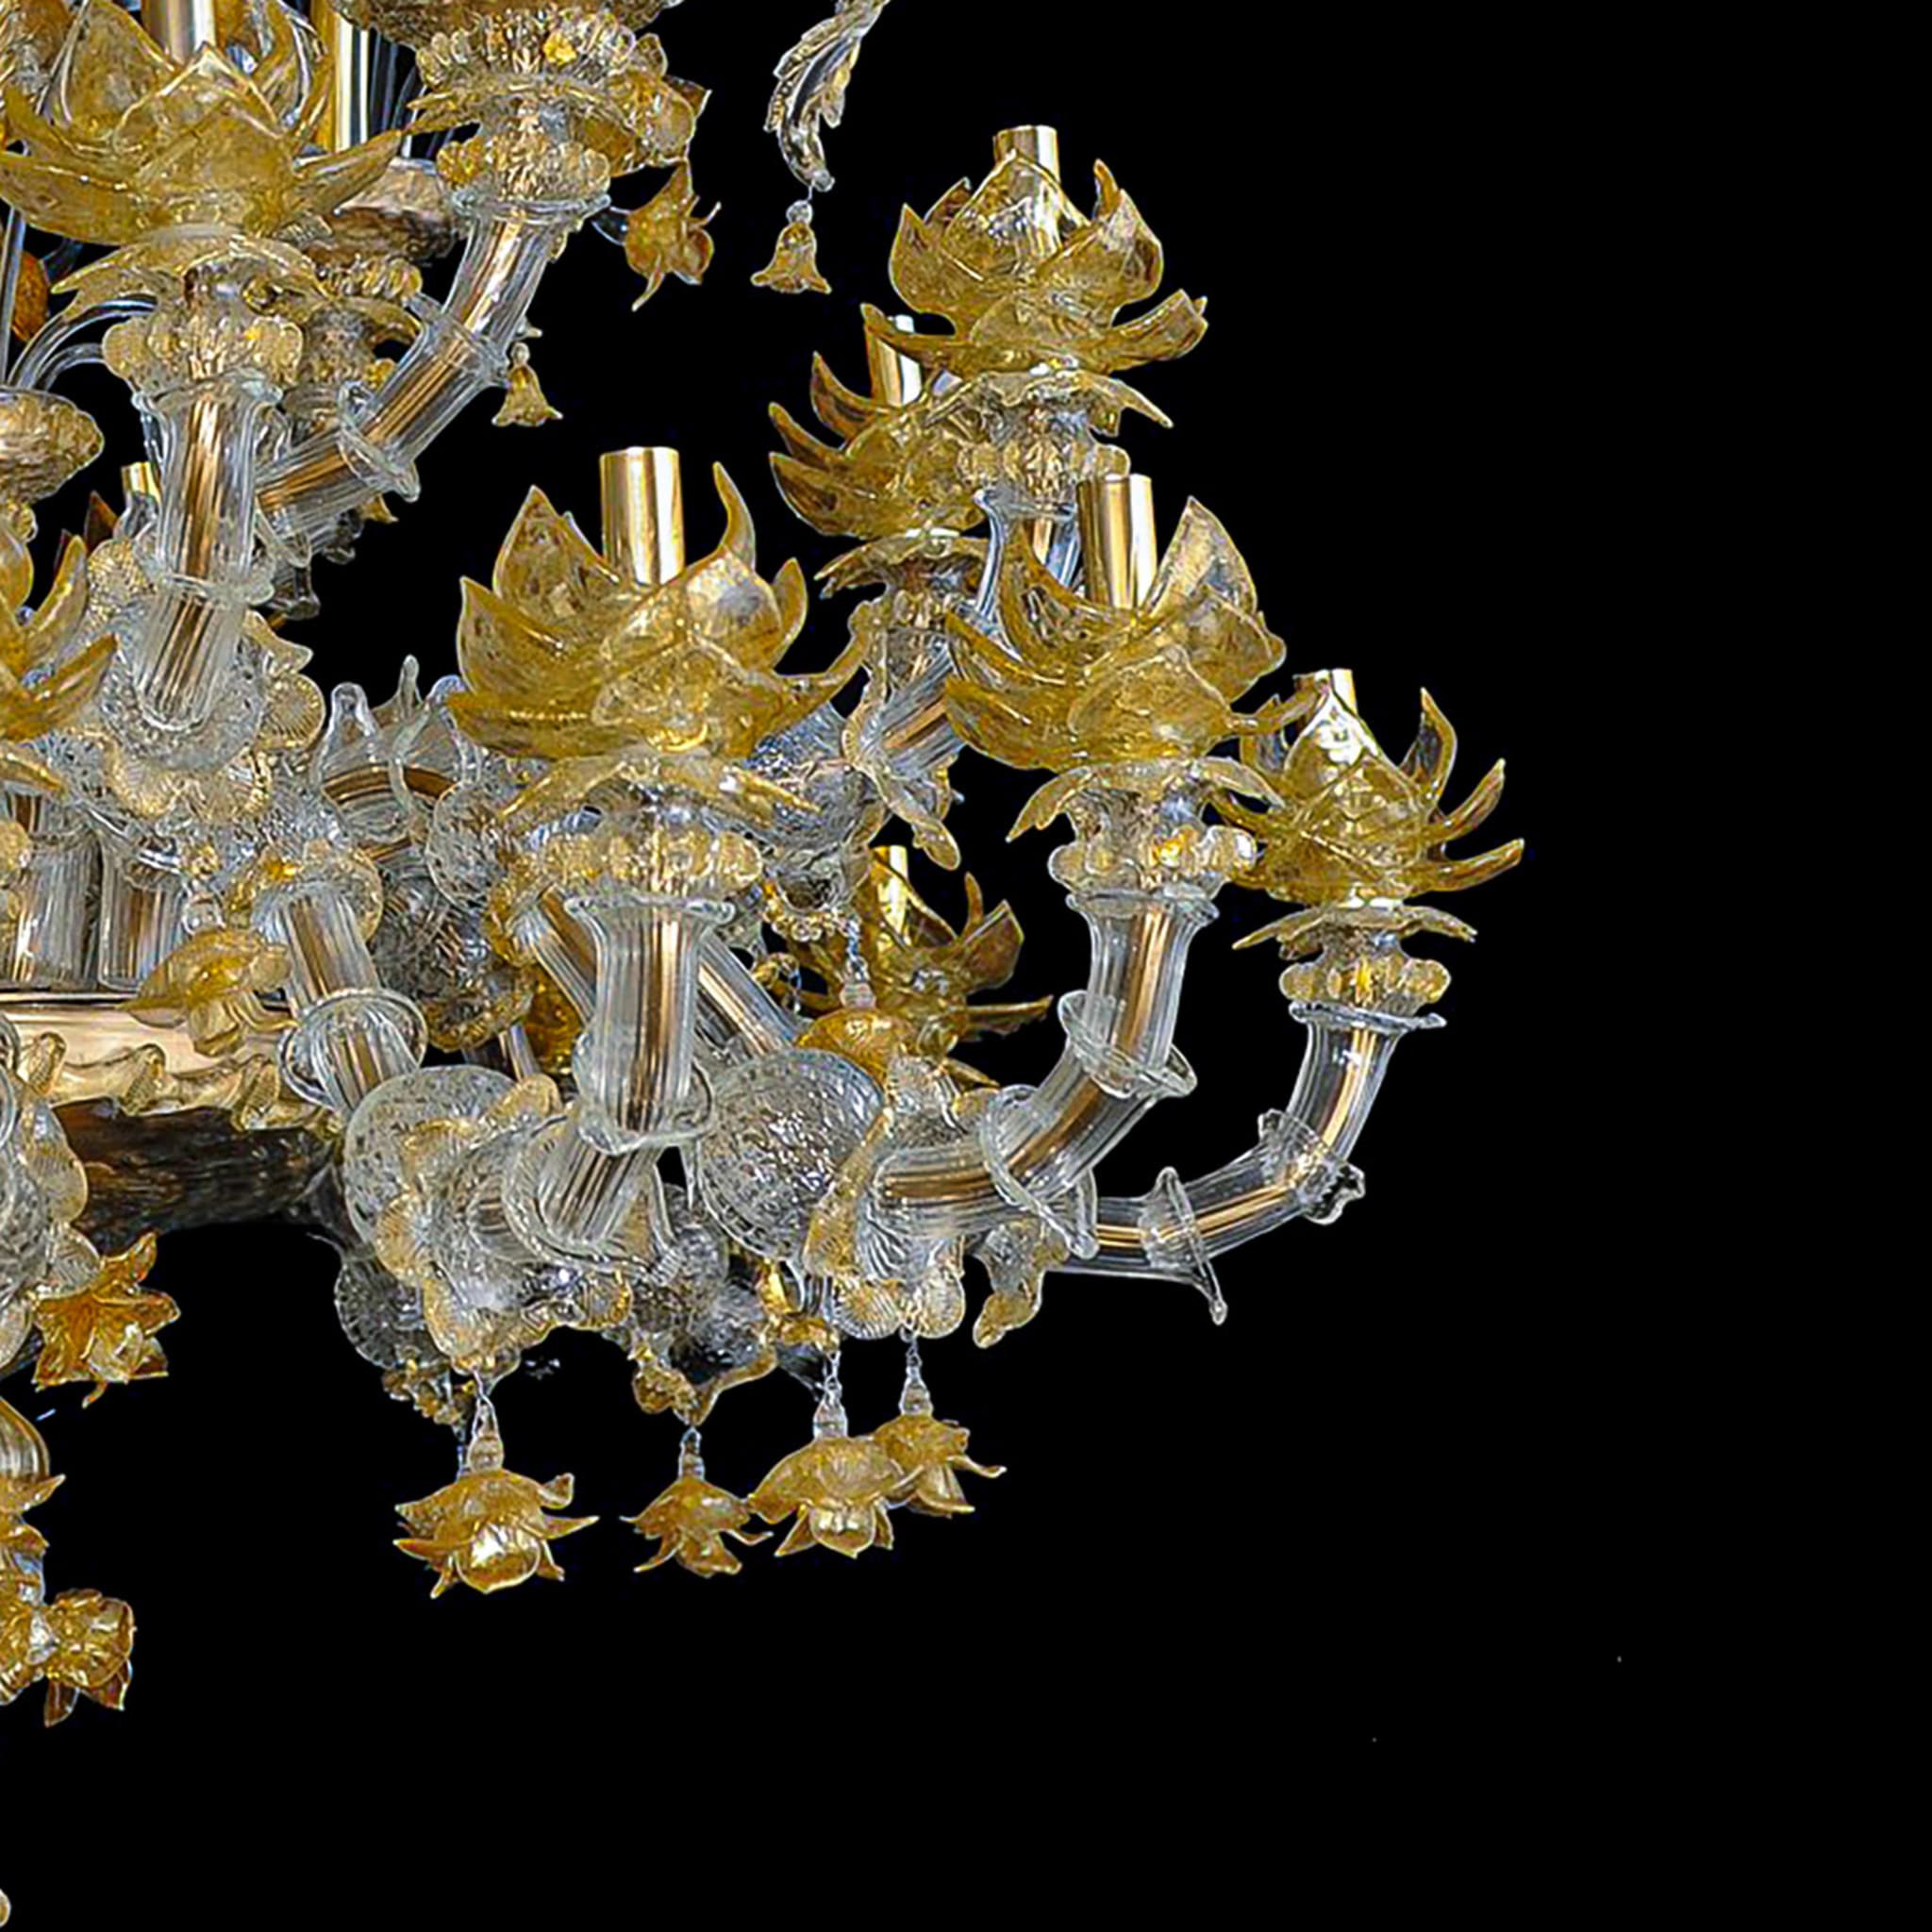 Rezzonico-style Gold and Crystal Chandelier #4 - Alternative view 4